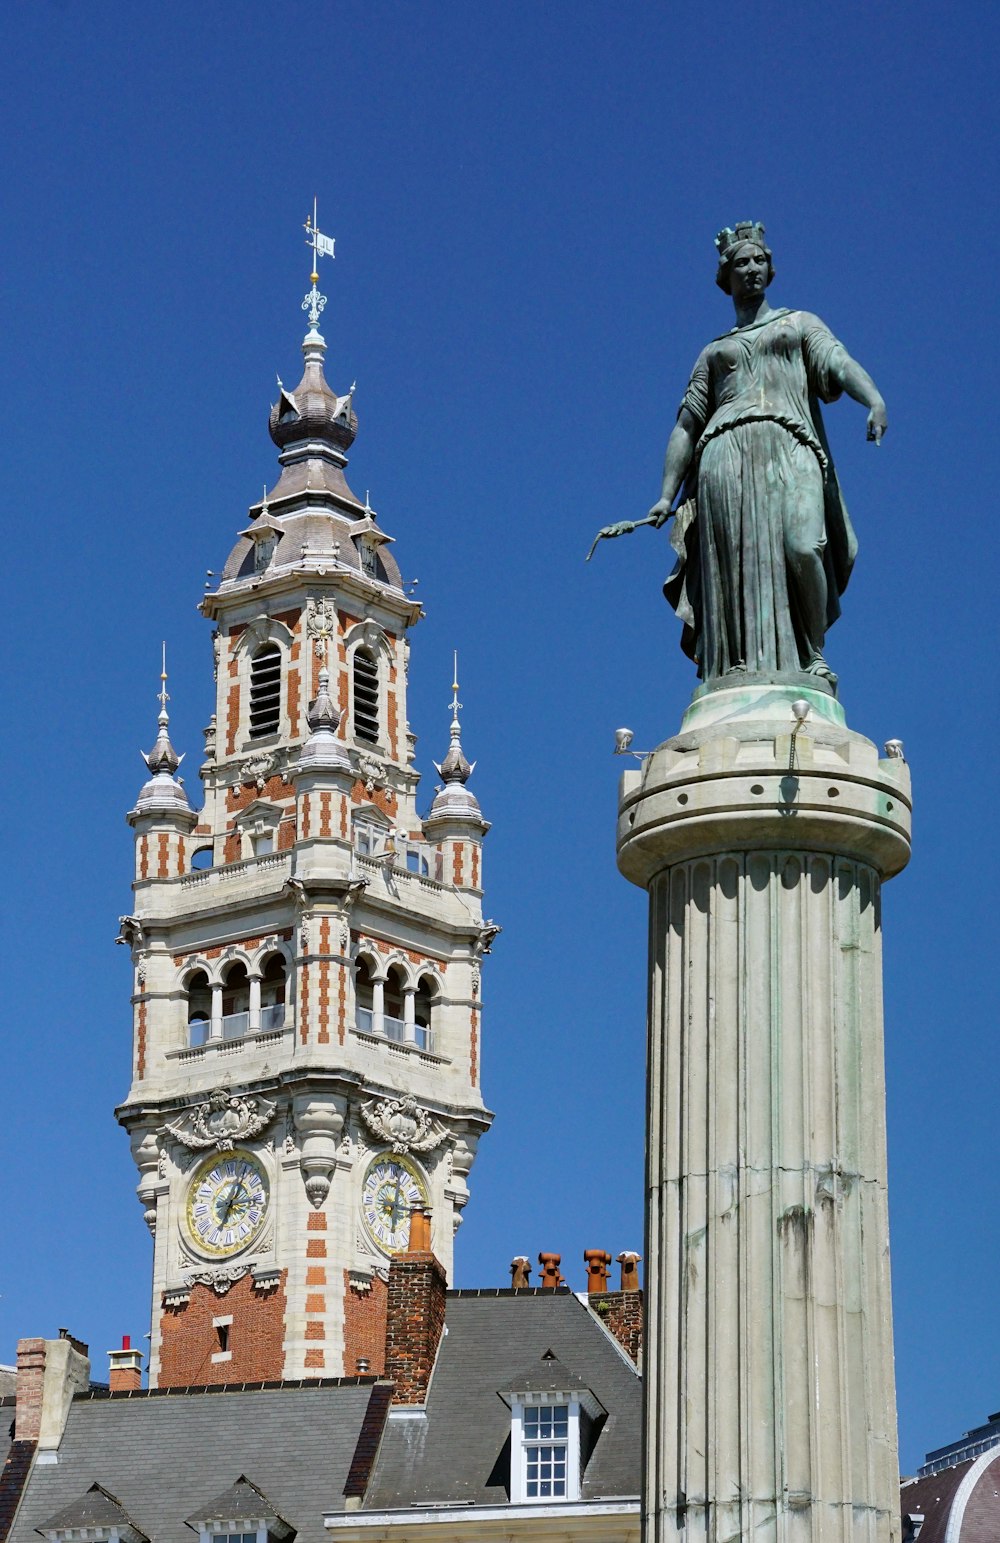 a tall building with a clock tower next to a statue